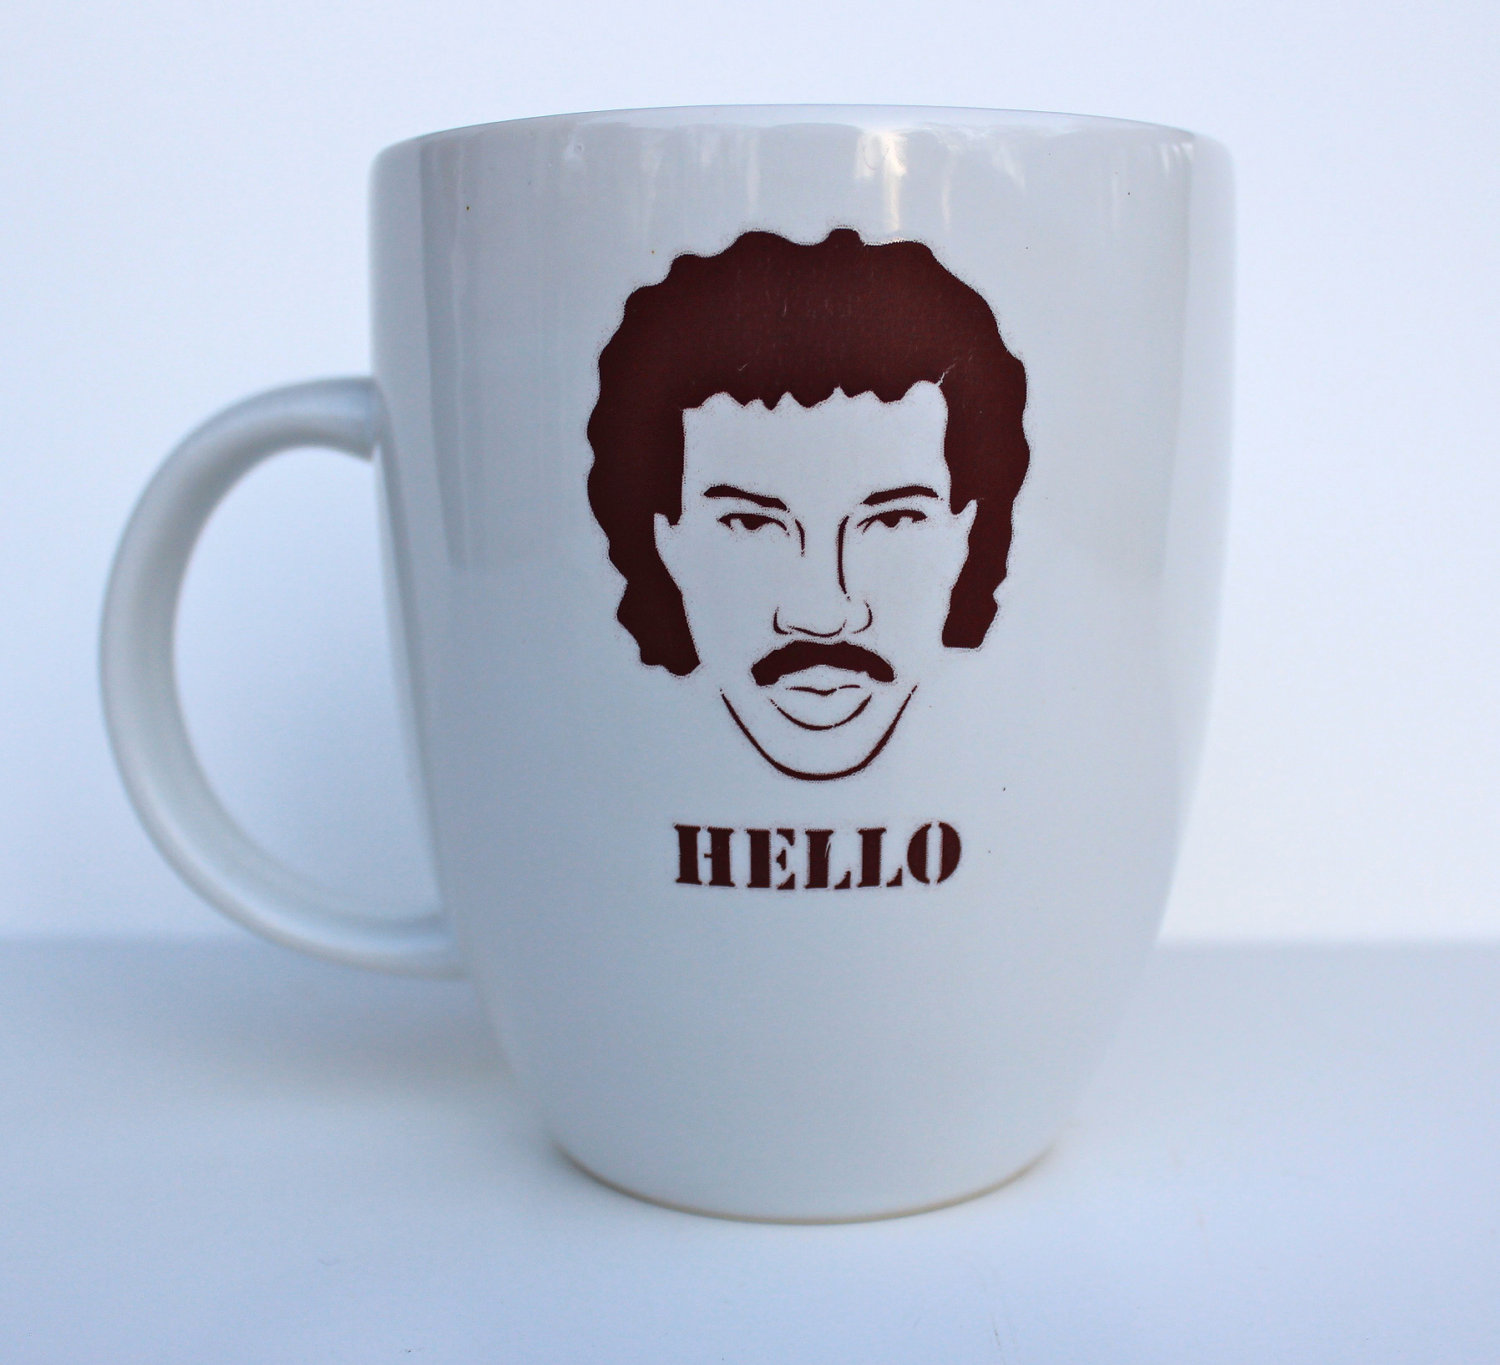 Lionel Richie inspired mug by SquackDoodle